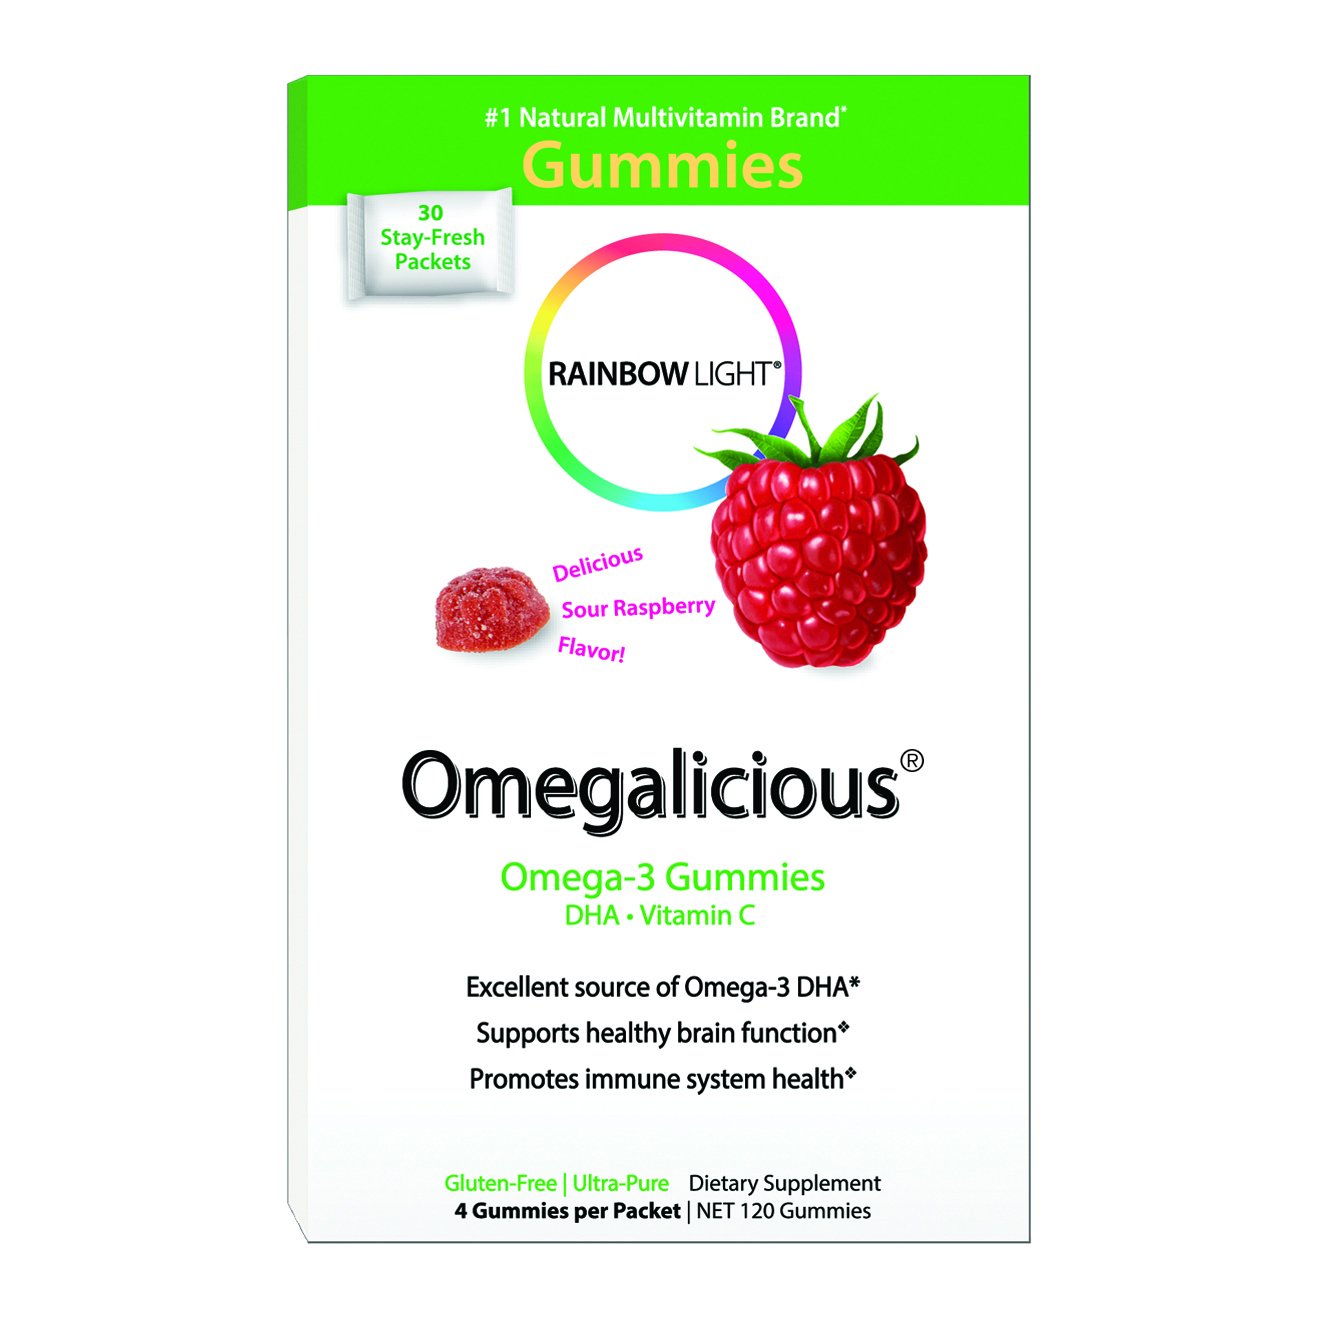 Book Cover Rainbow Light - Omegalicious Omega-3 Gummies, Support for a Healthy Brain, Heart, and Immune System with Vitamin C, Omega-3s DHA and EPA, Gluten-Free, Dairy-Free, 30 Packets